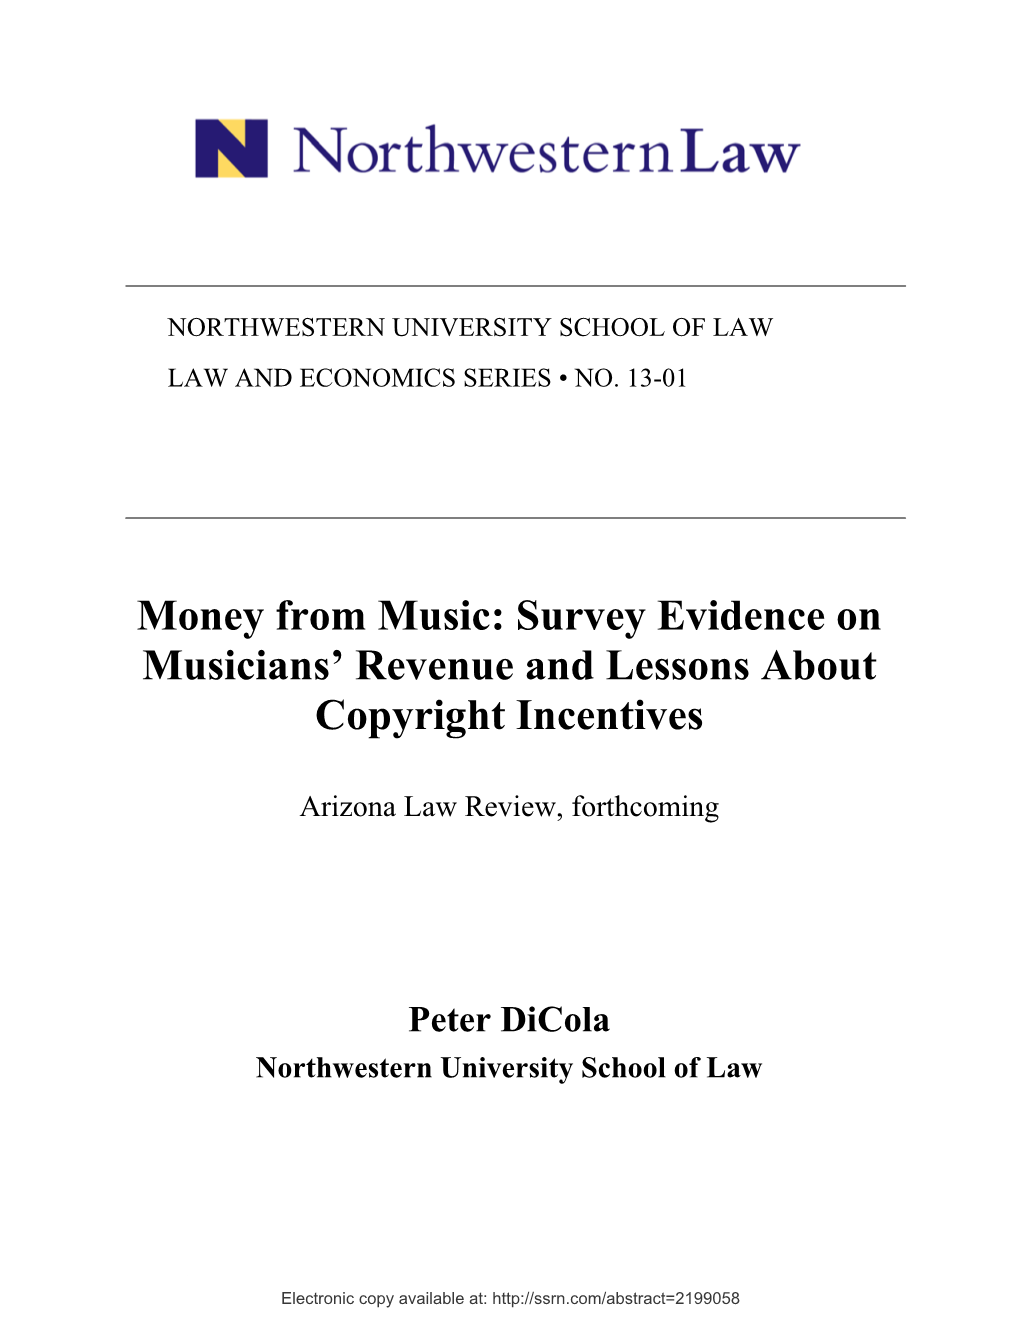 Money from Music: Survey Evidence on Musicians' Revenue And